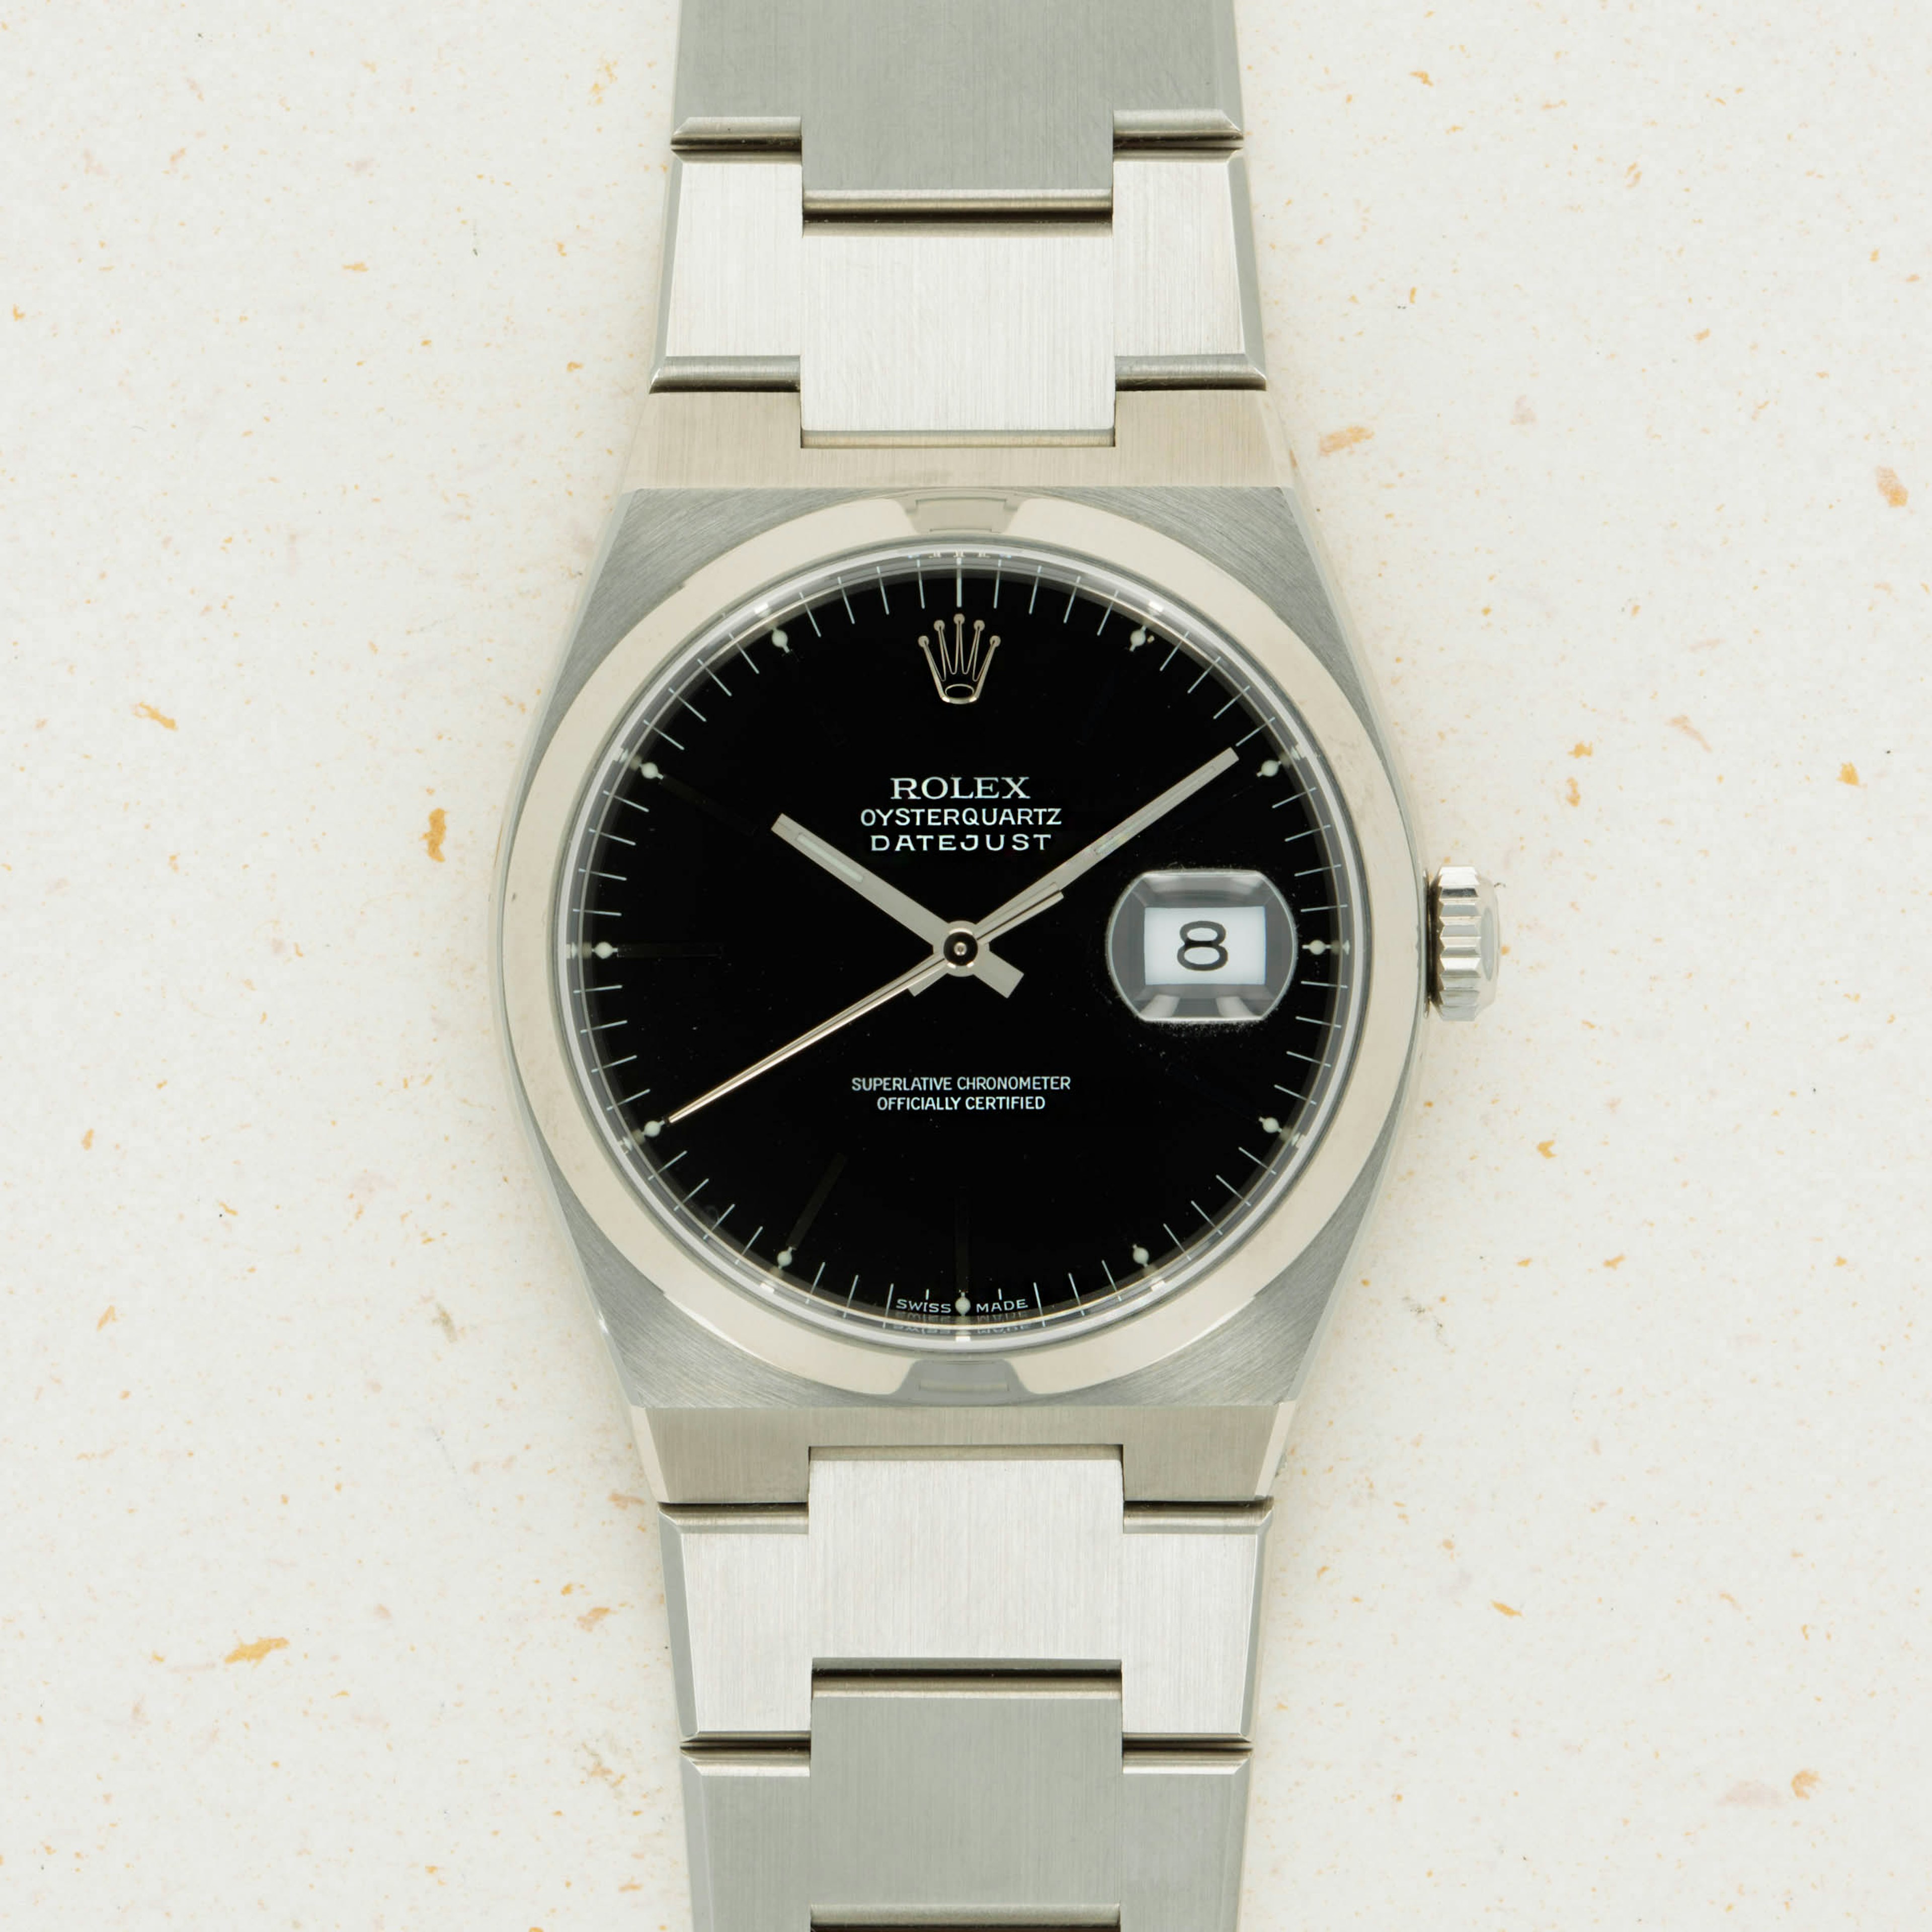 Thumbnail for Rolex Oysterquartz 17000 Black Dial Stainless Steel Box and Papers New Old Stock